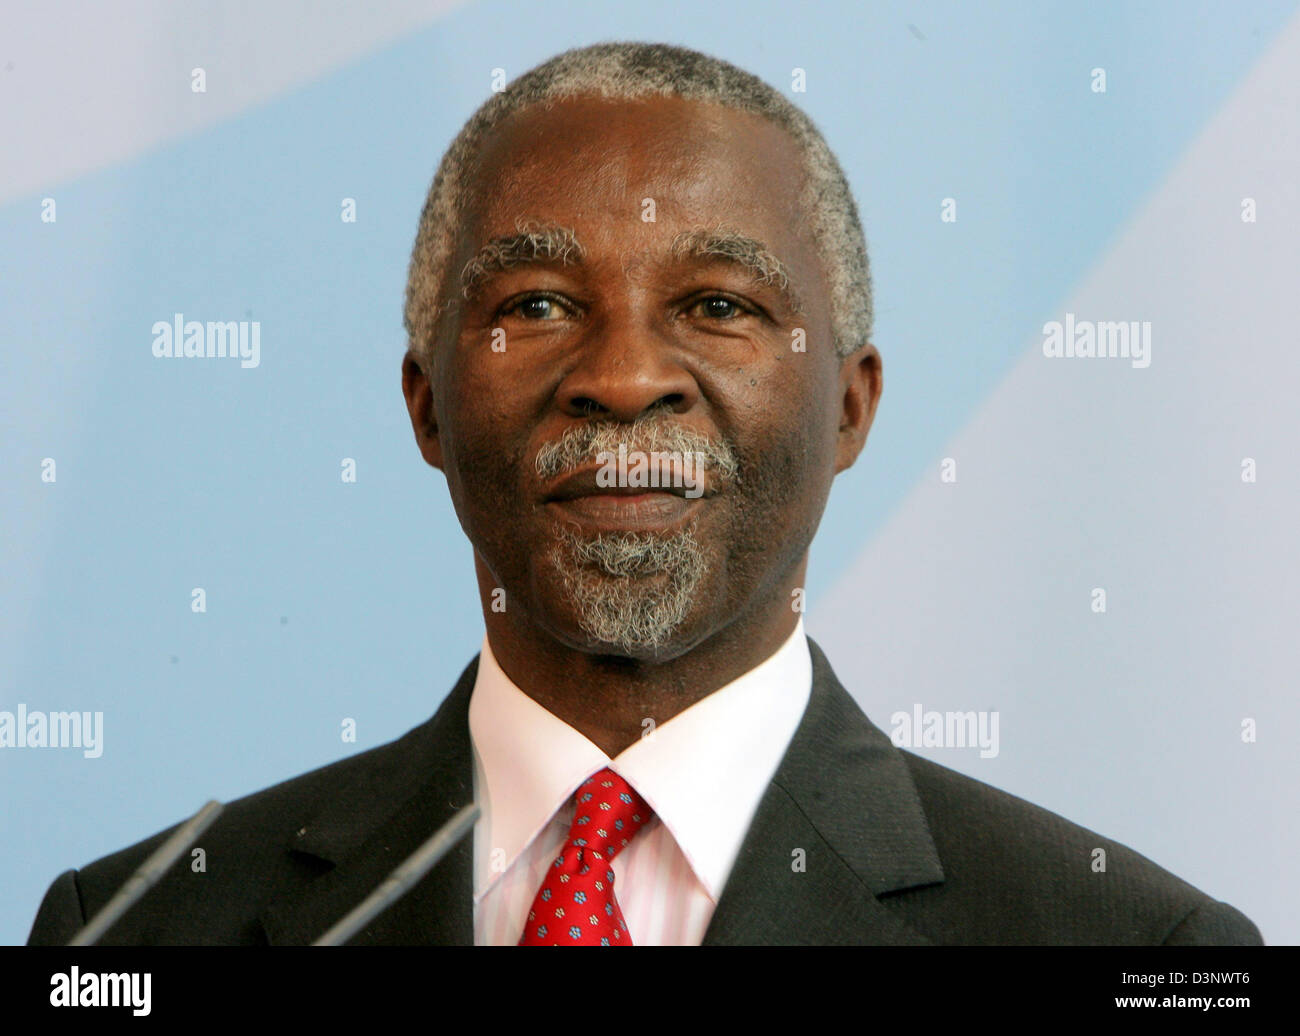 President of South Africa Thabo Mbeki is pictured during a press conference in Berlin, Germany, Saturday, 08 July 2006. Photo: Tim Brakemeier Stock Photo